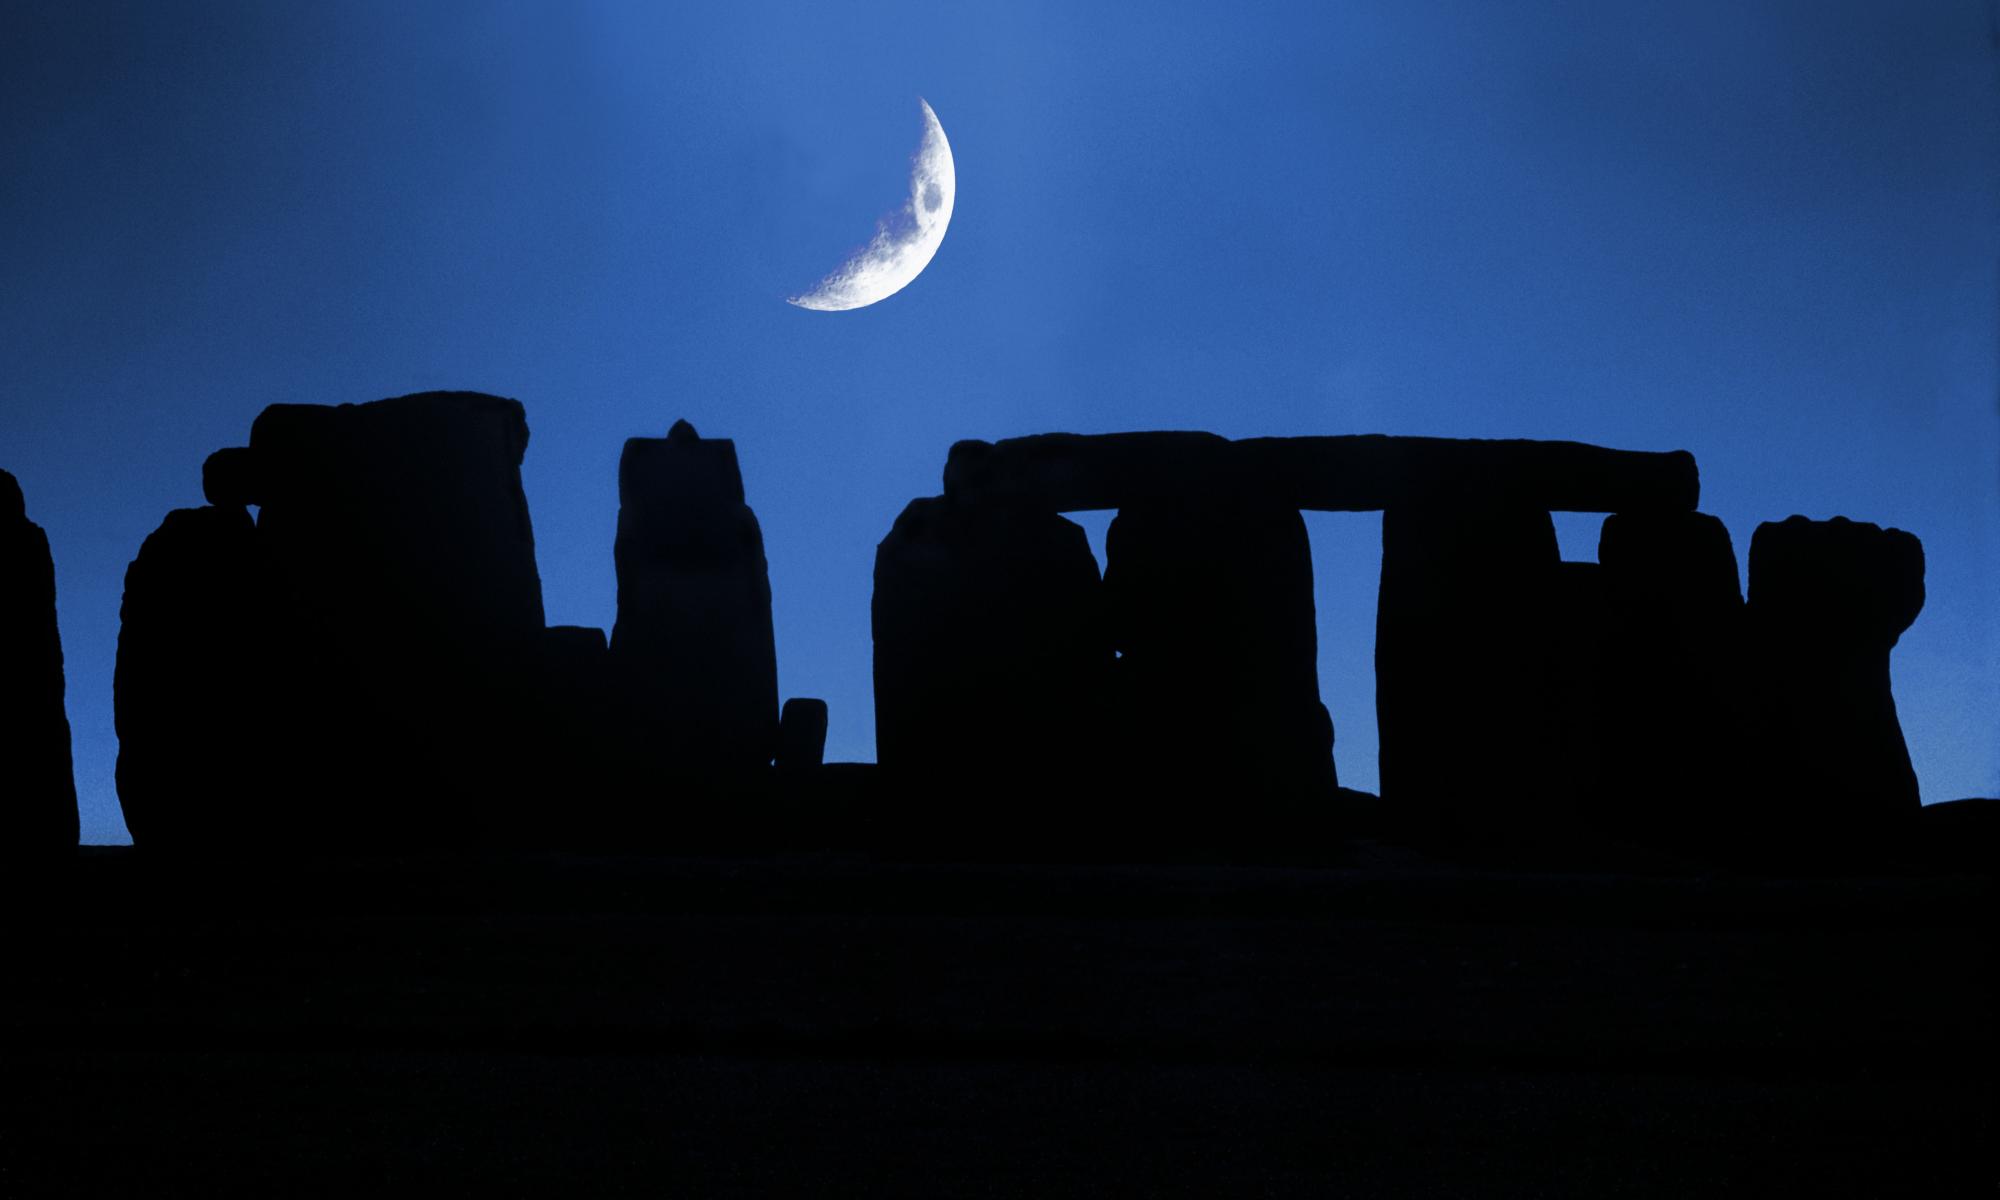 once-in-a-generation lunar event to shed light on stonehenge’s links to the moon